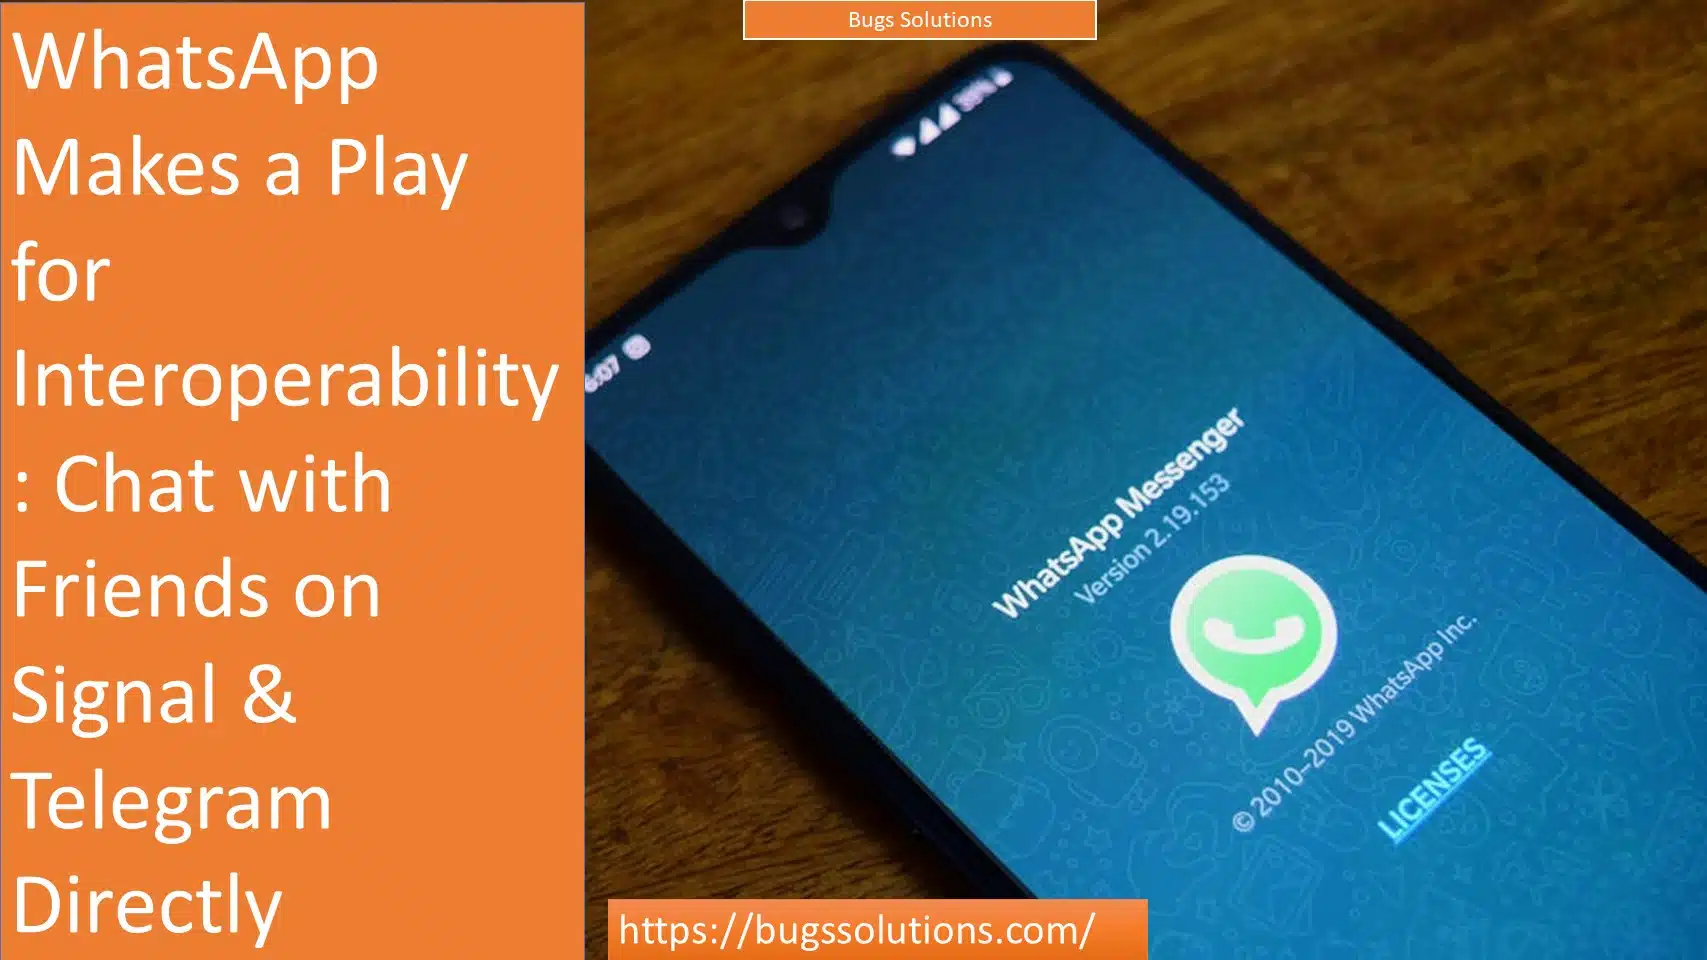 WhatsApp Makes a Play for Interoperability: Chat with Friends on Signal & Telegram Directly